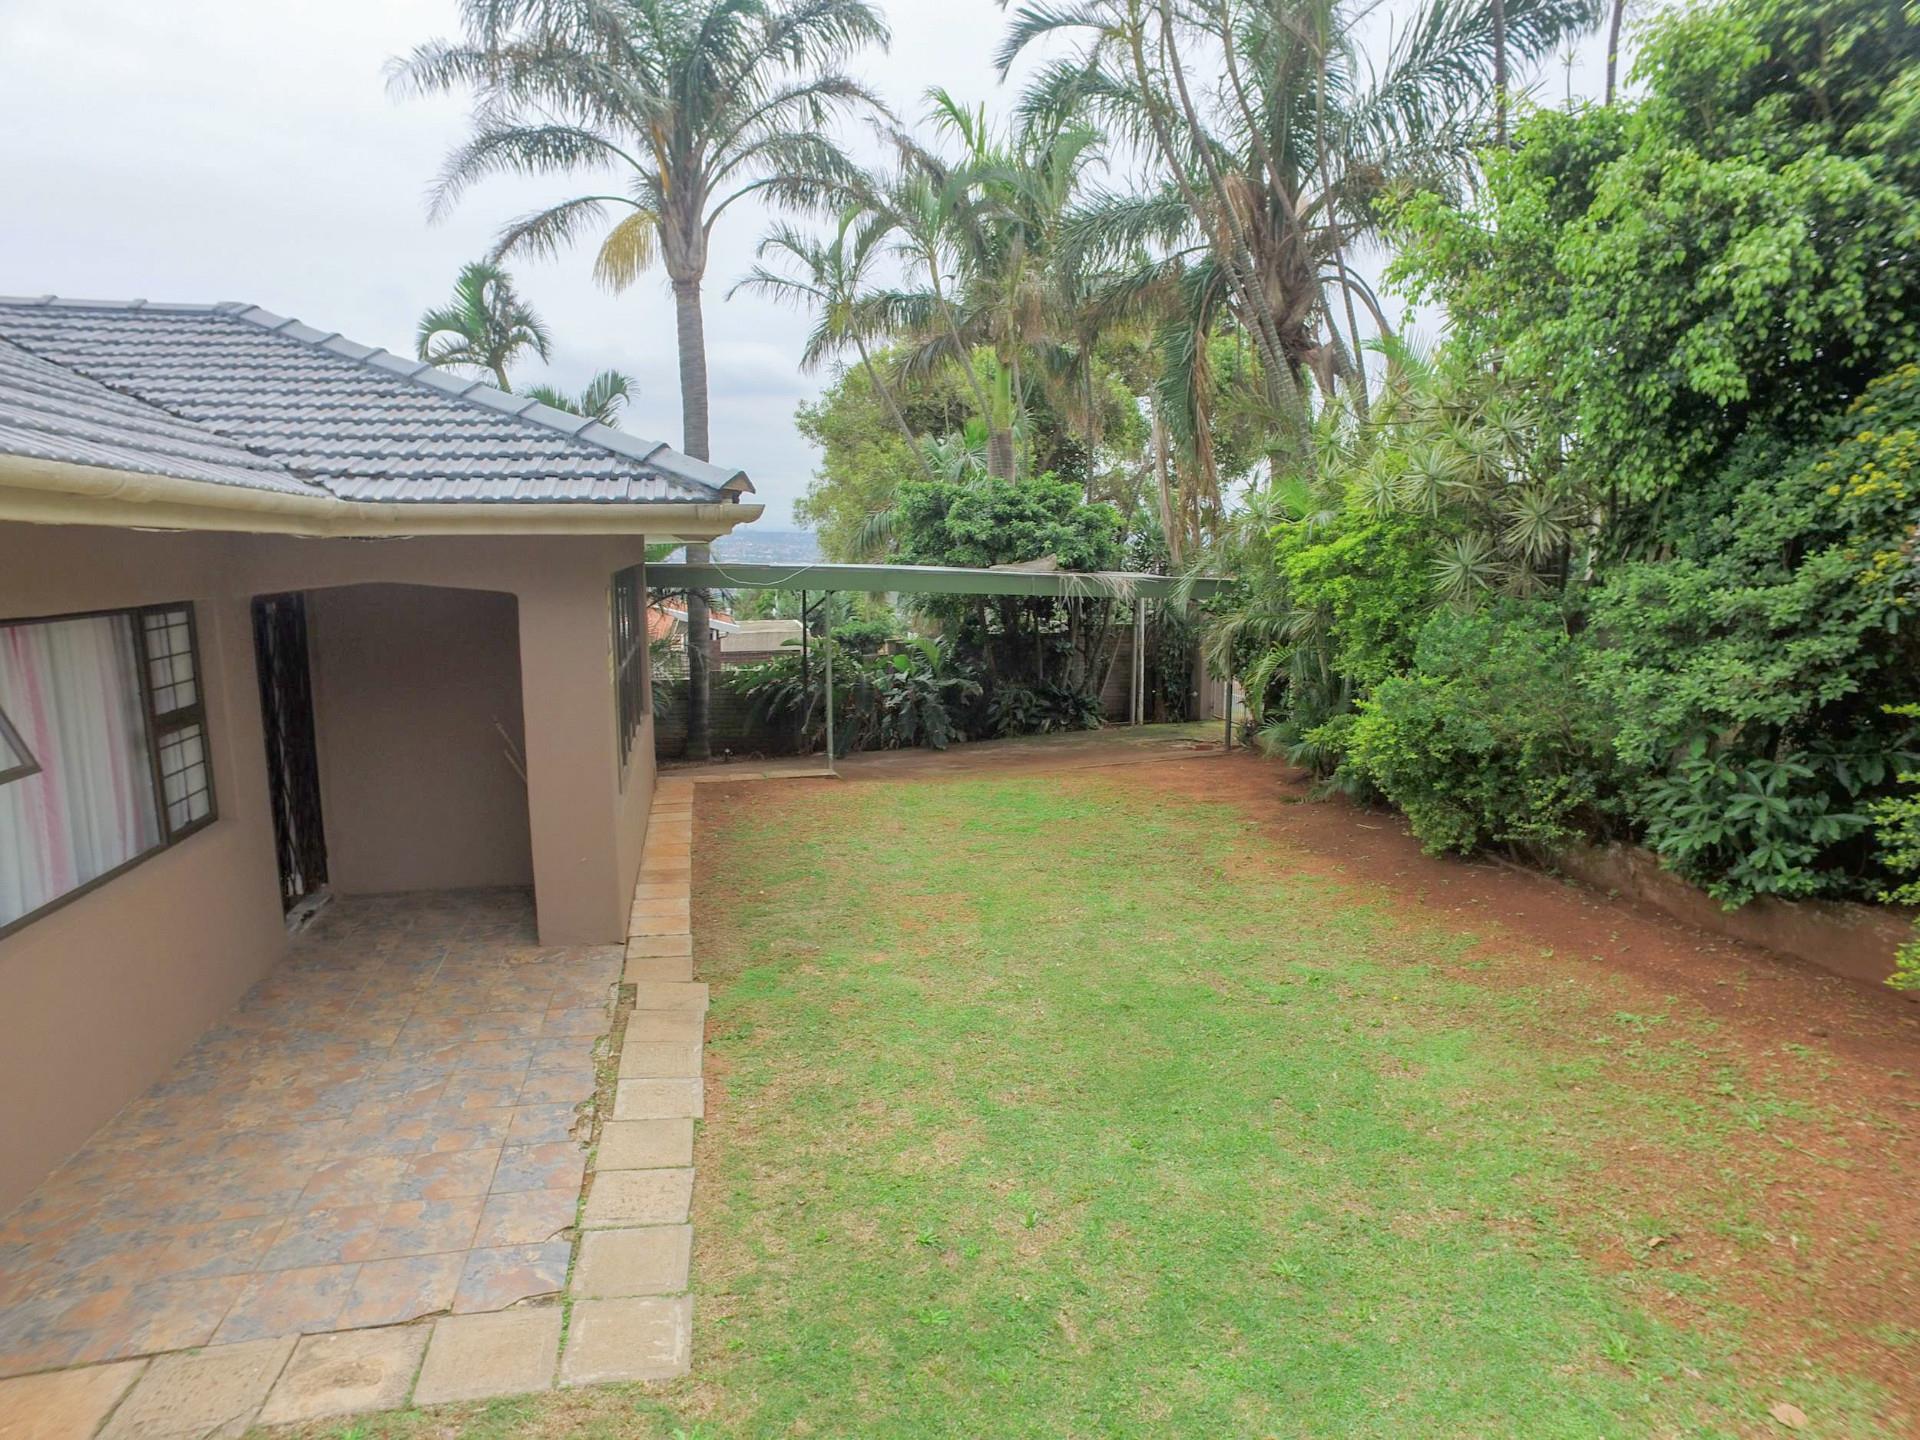 3 Bedroom House For Sale in Bluff | RE/MAX™ of Southern Africa